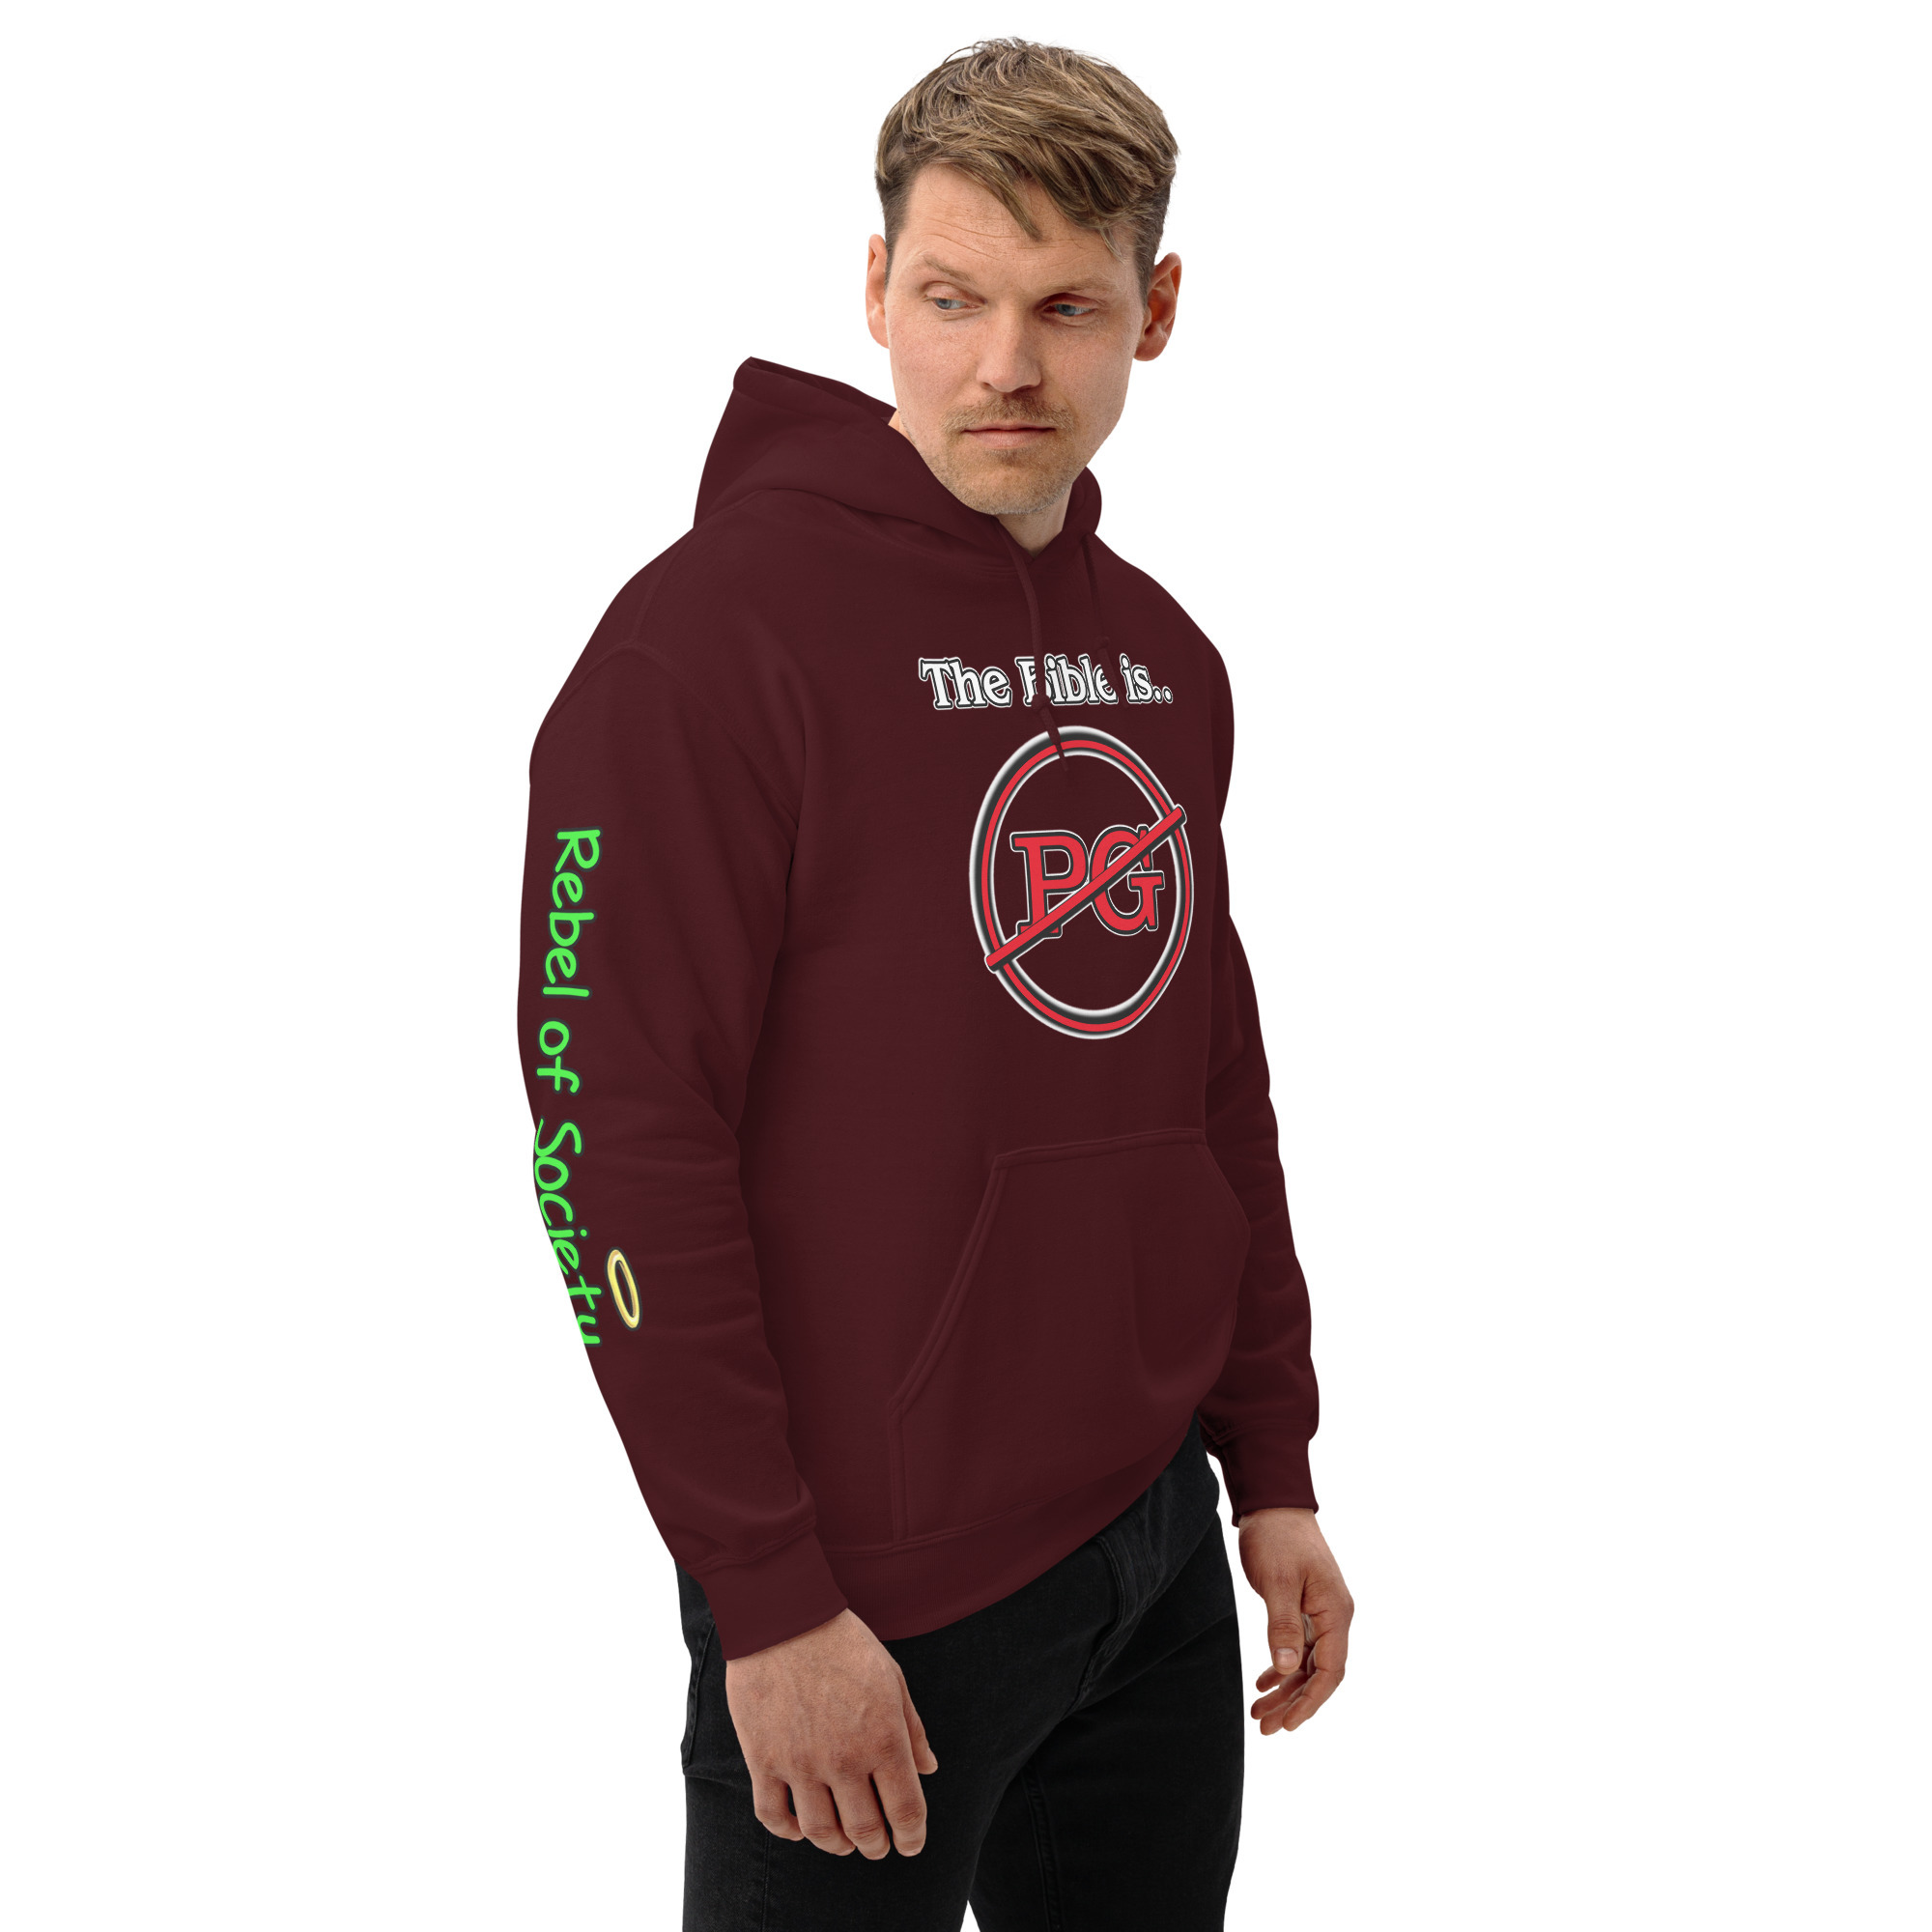 New The Bible is not PG Unisex Hoodie (Now with 10+ Colors & Sizes:  Small-4XL)